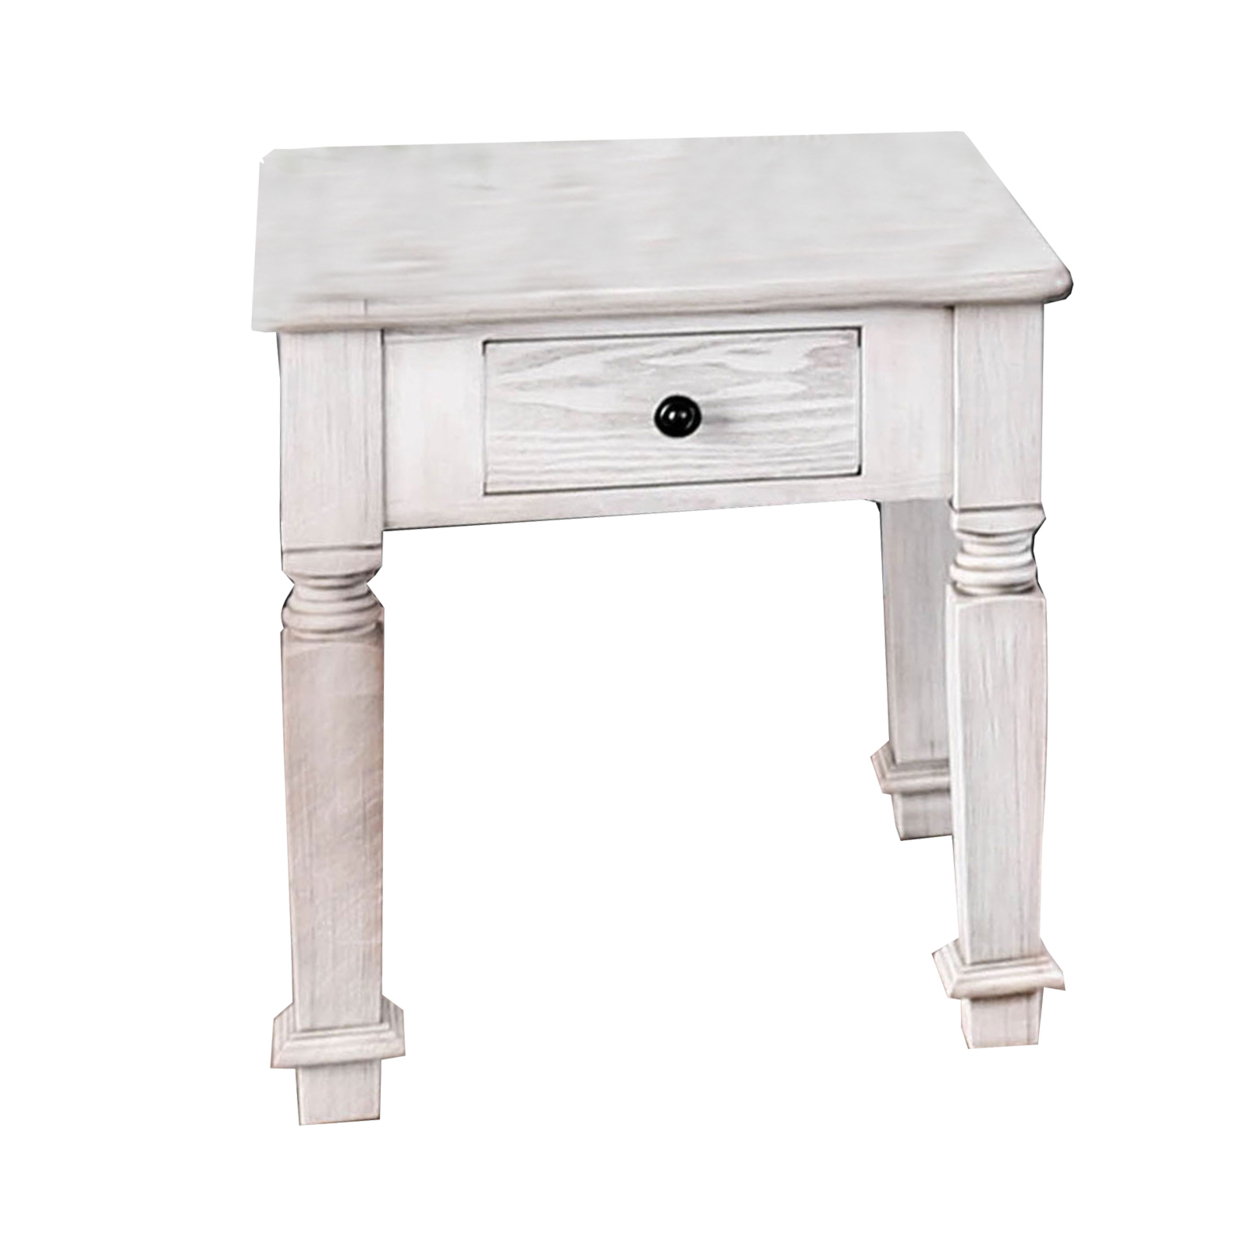 Transitional Style Wooden End Table With 1 Drawer Storage, White- Saltoro Sherpi